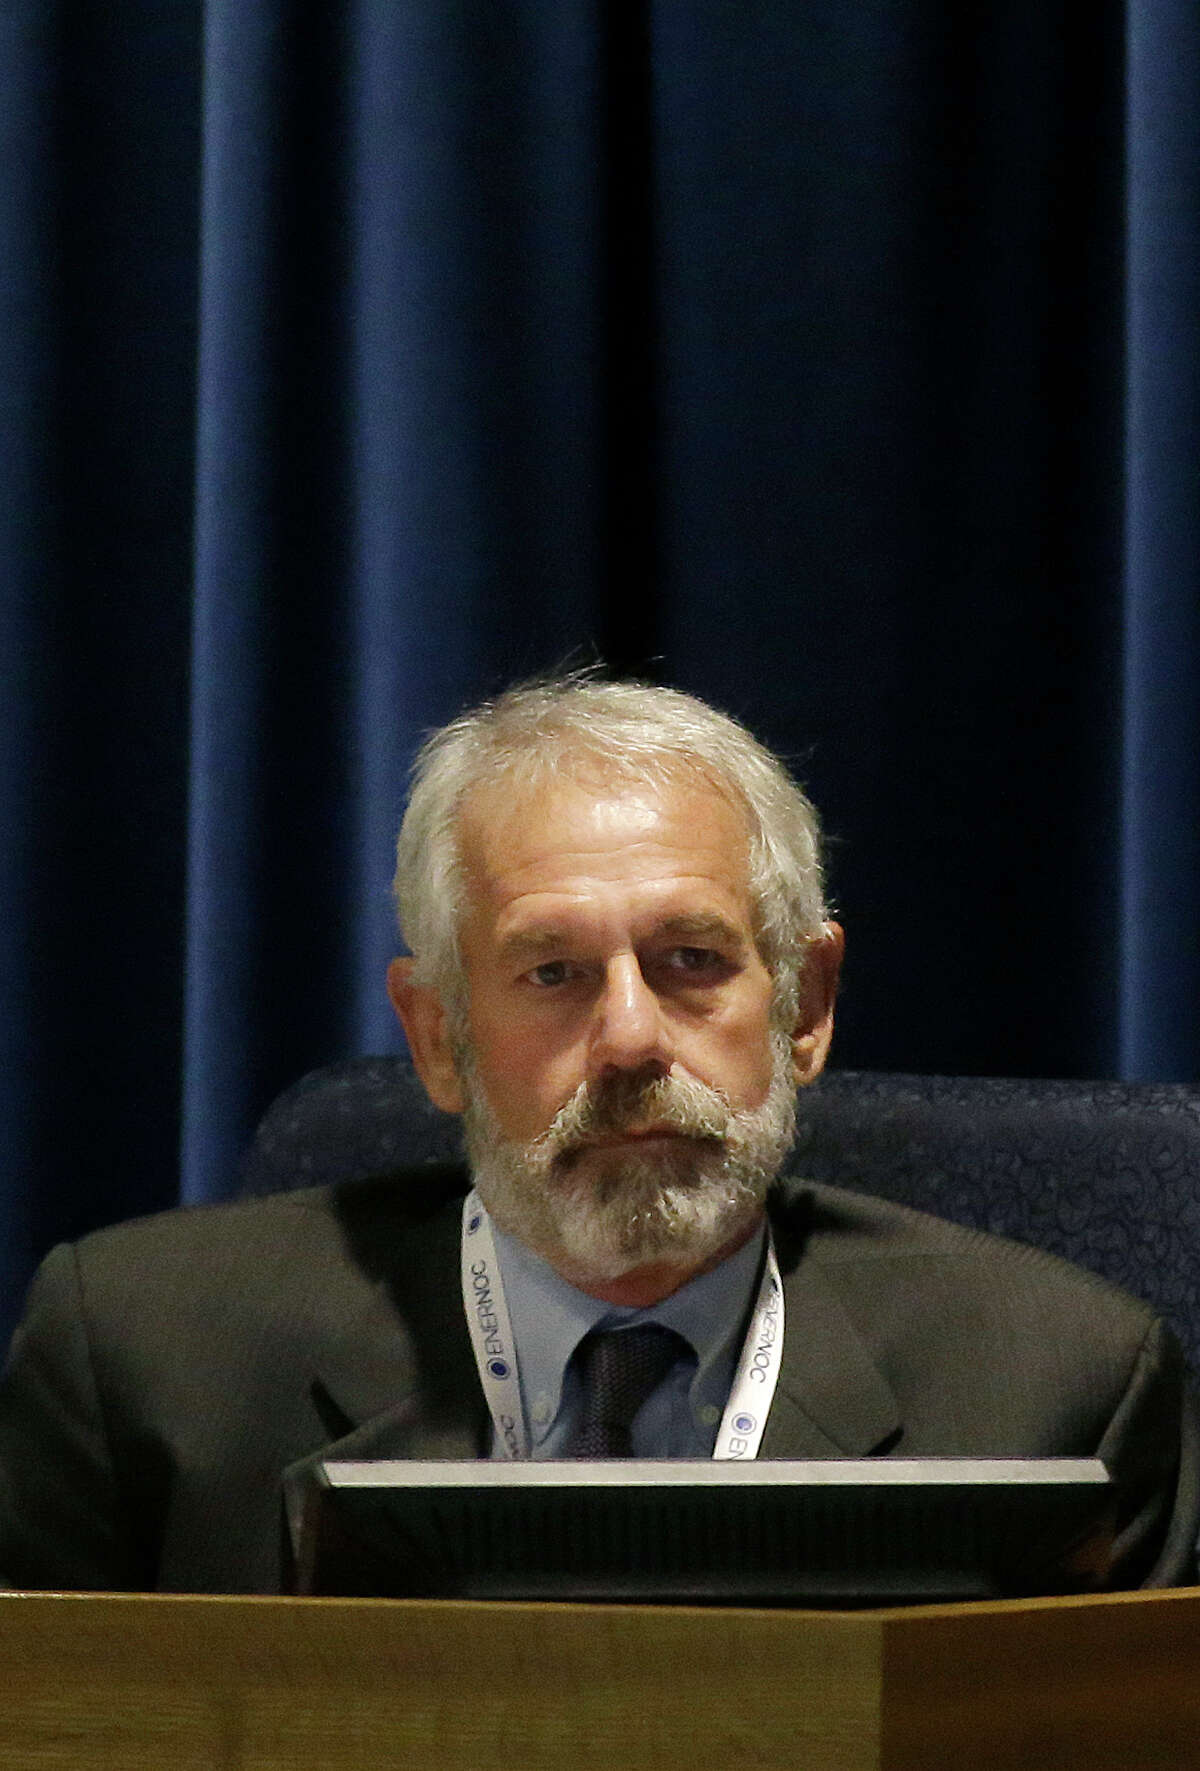 This Dec. 18, 2014 photo shows California Public Utilities Commissioner Michael Picker during a meeting of the five-member commission in San Francisco.